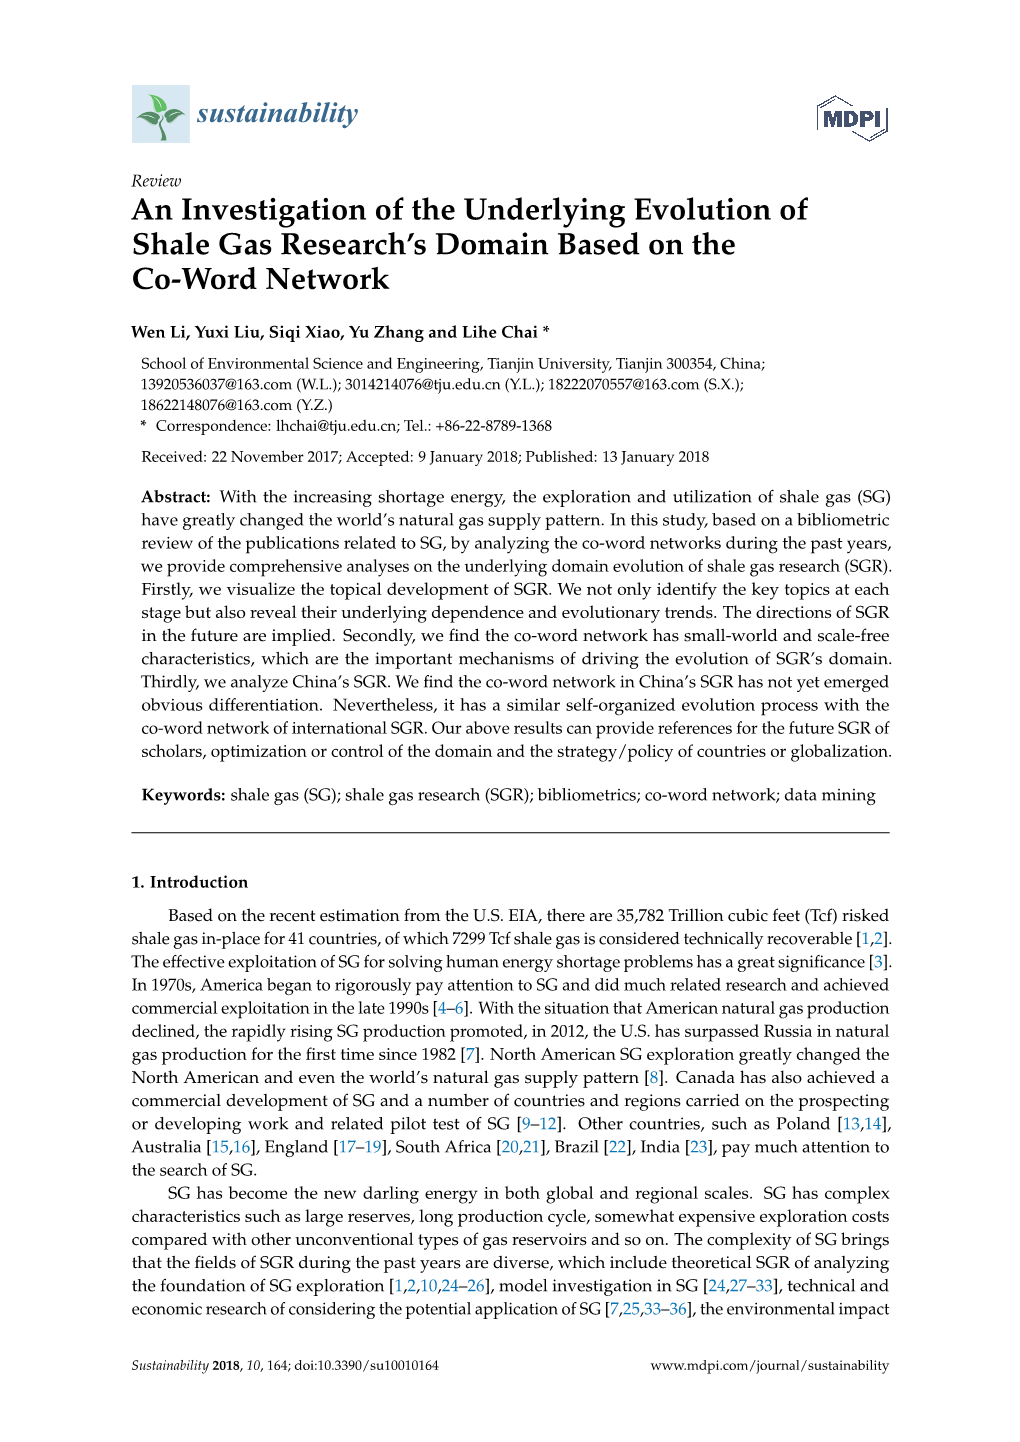 An Investigation of the Underlying Evolution of Shale Gas Research's Domain Based on the Co-Word Network